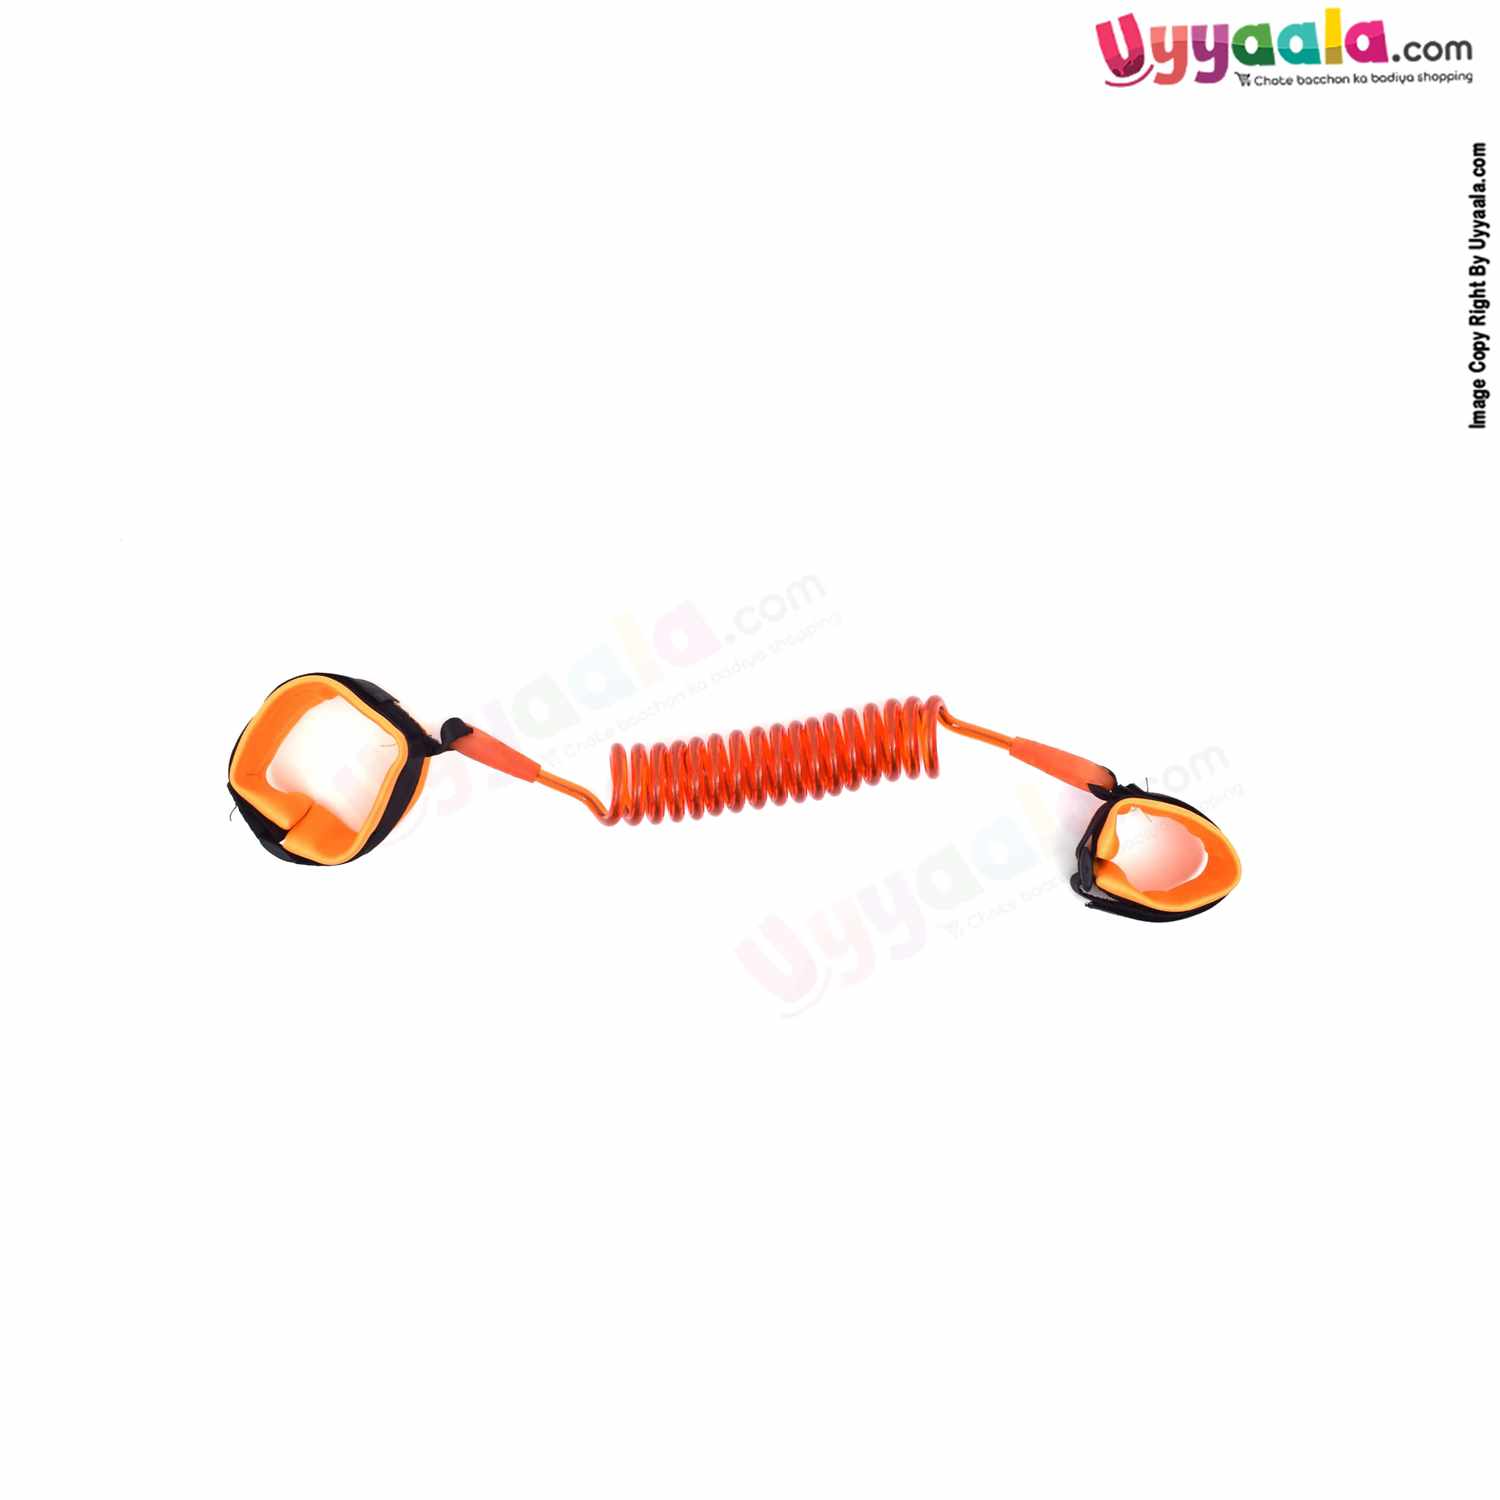 Child Safety Anti-Lost Wrist Link Belt with flexible 360° rotation to keep an Eye on your Child - Orange